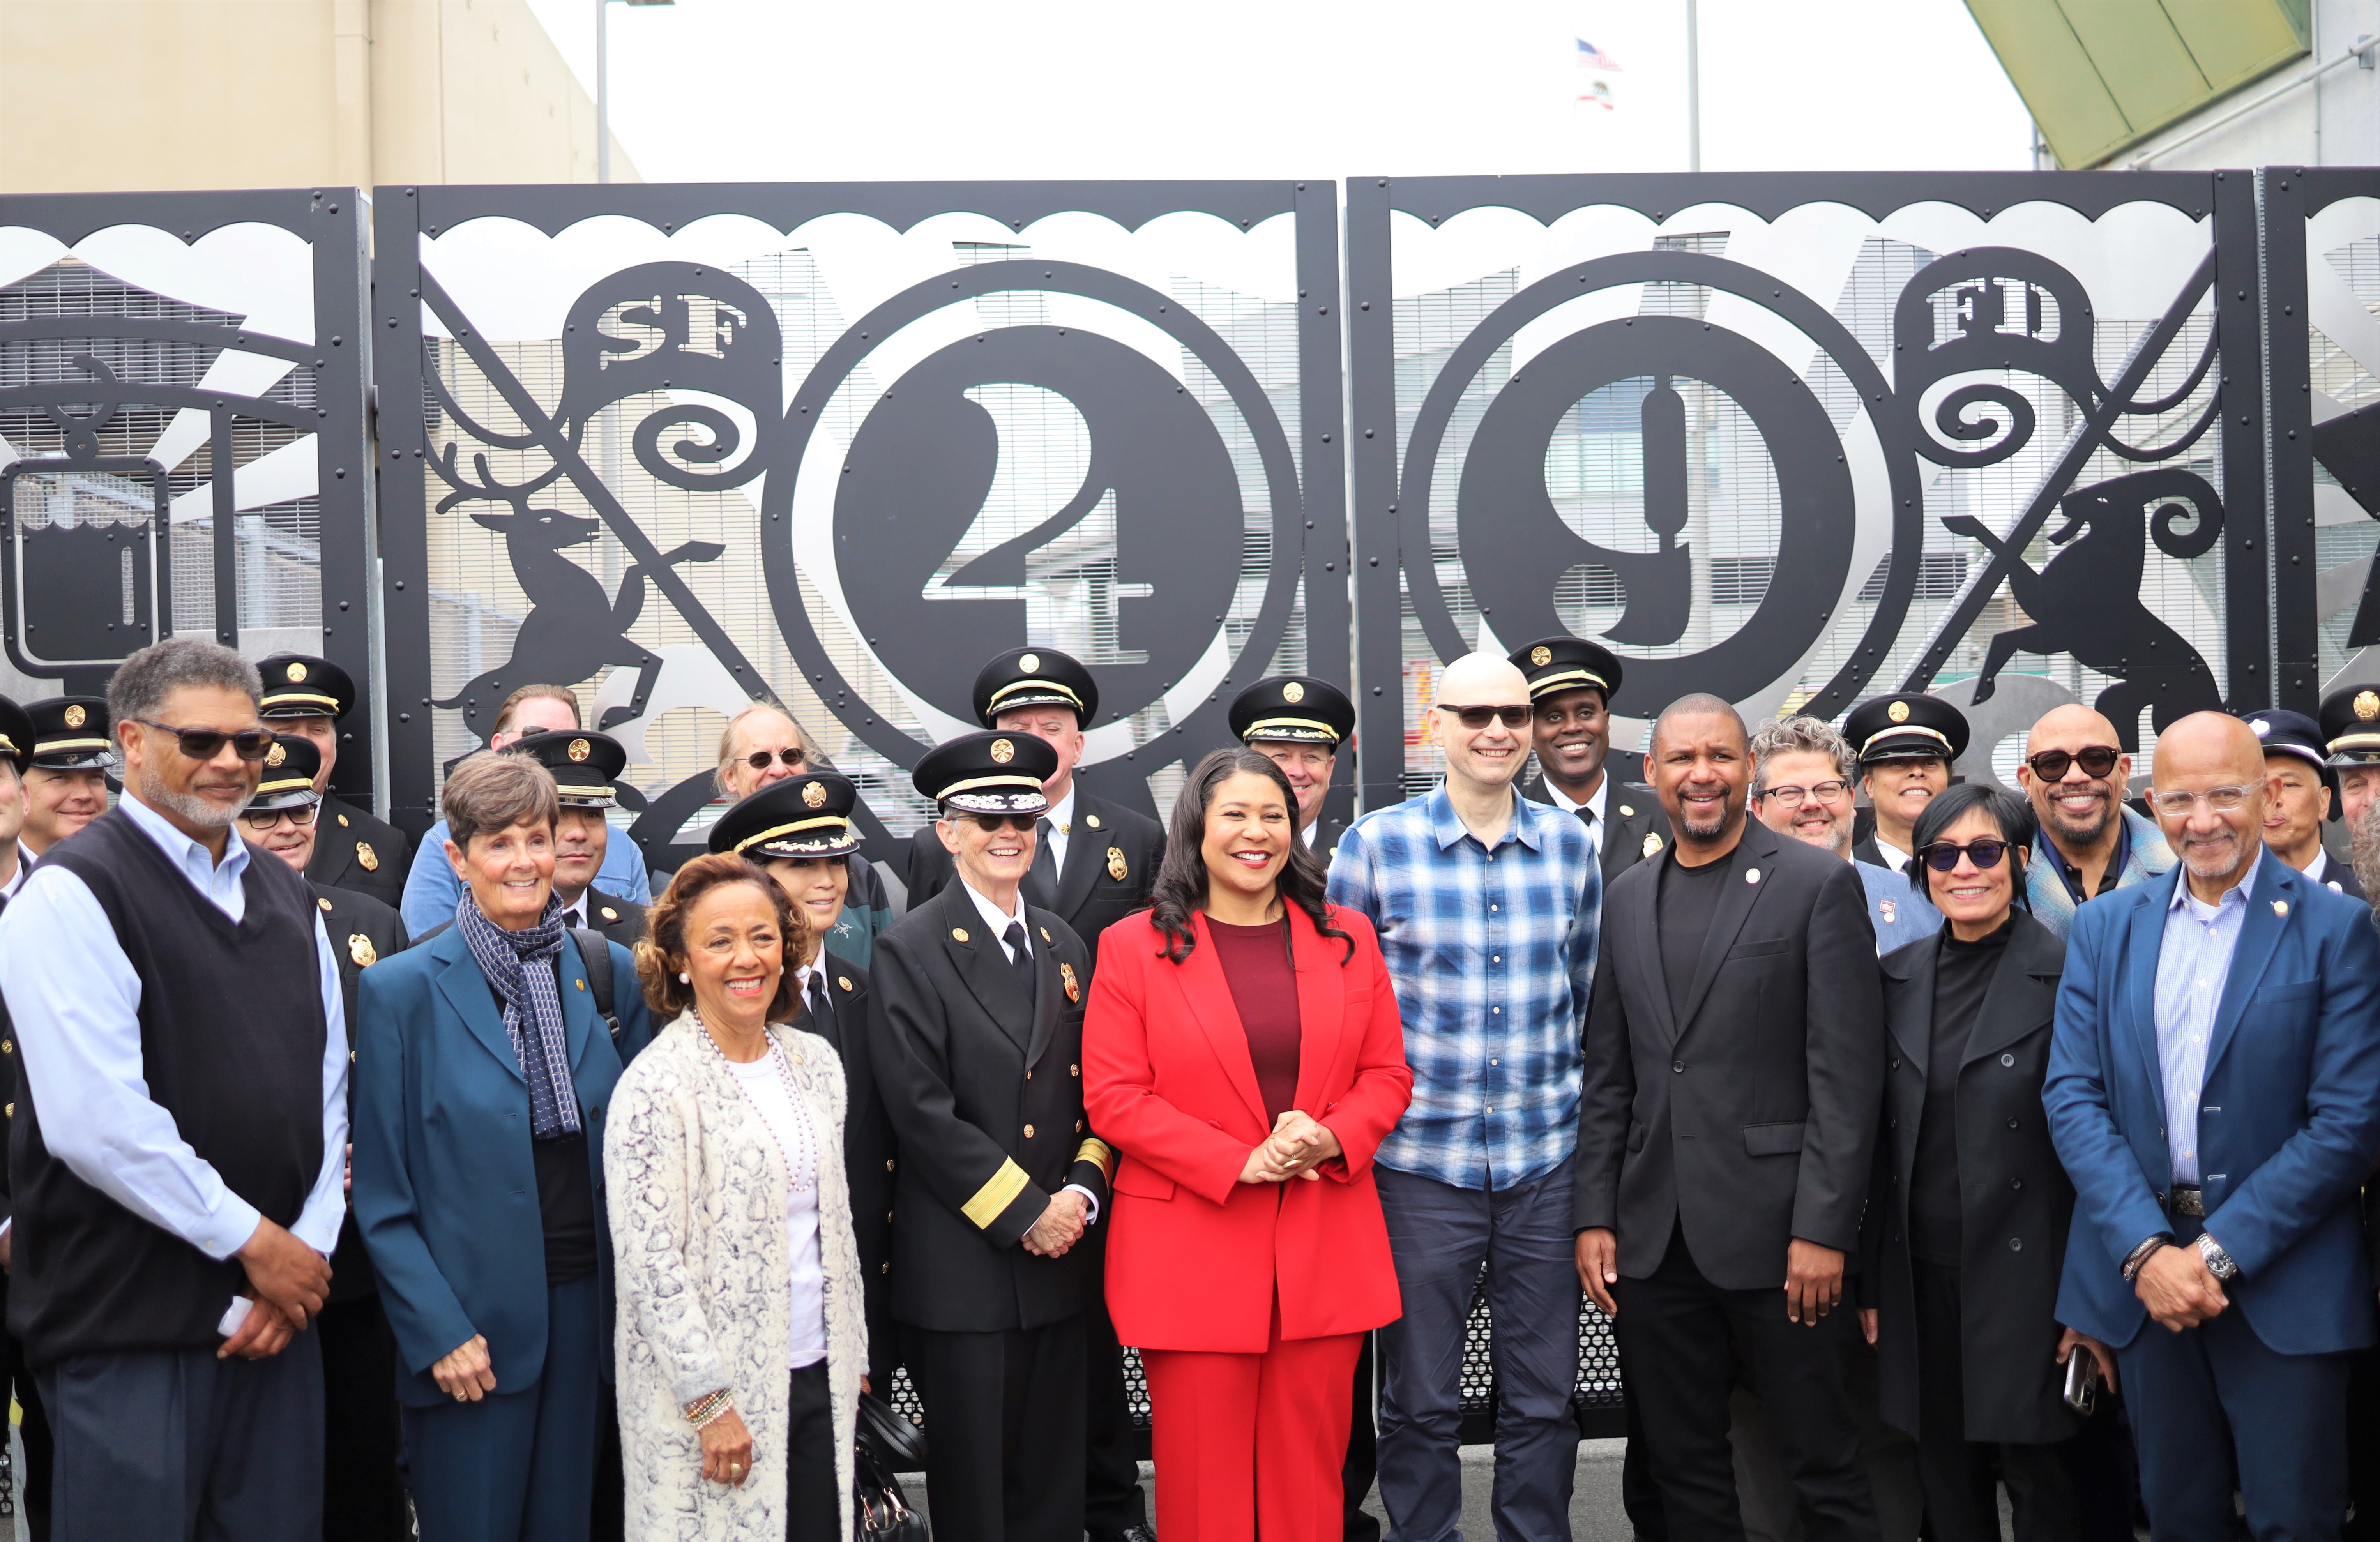 Mayor London Breed with group of City Officials and special guests standing in front of the fence of Station 49